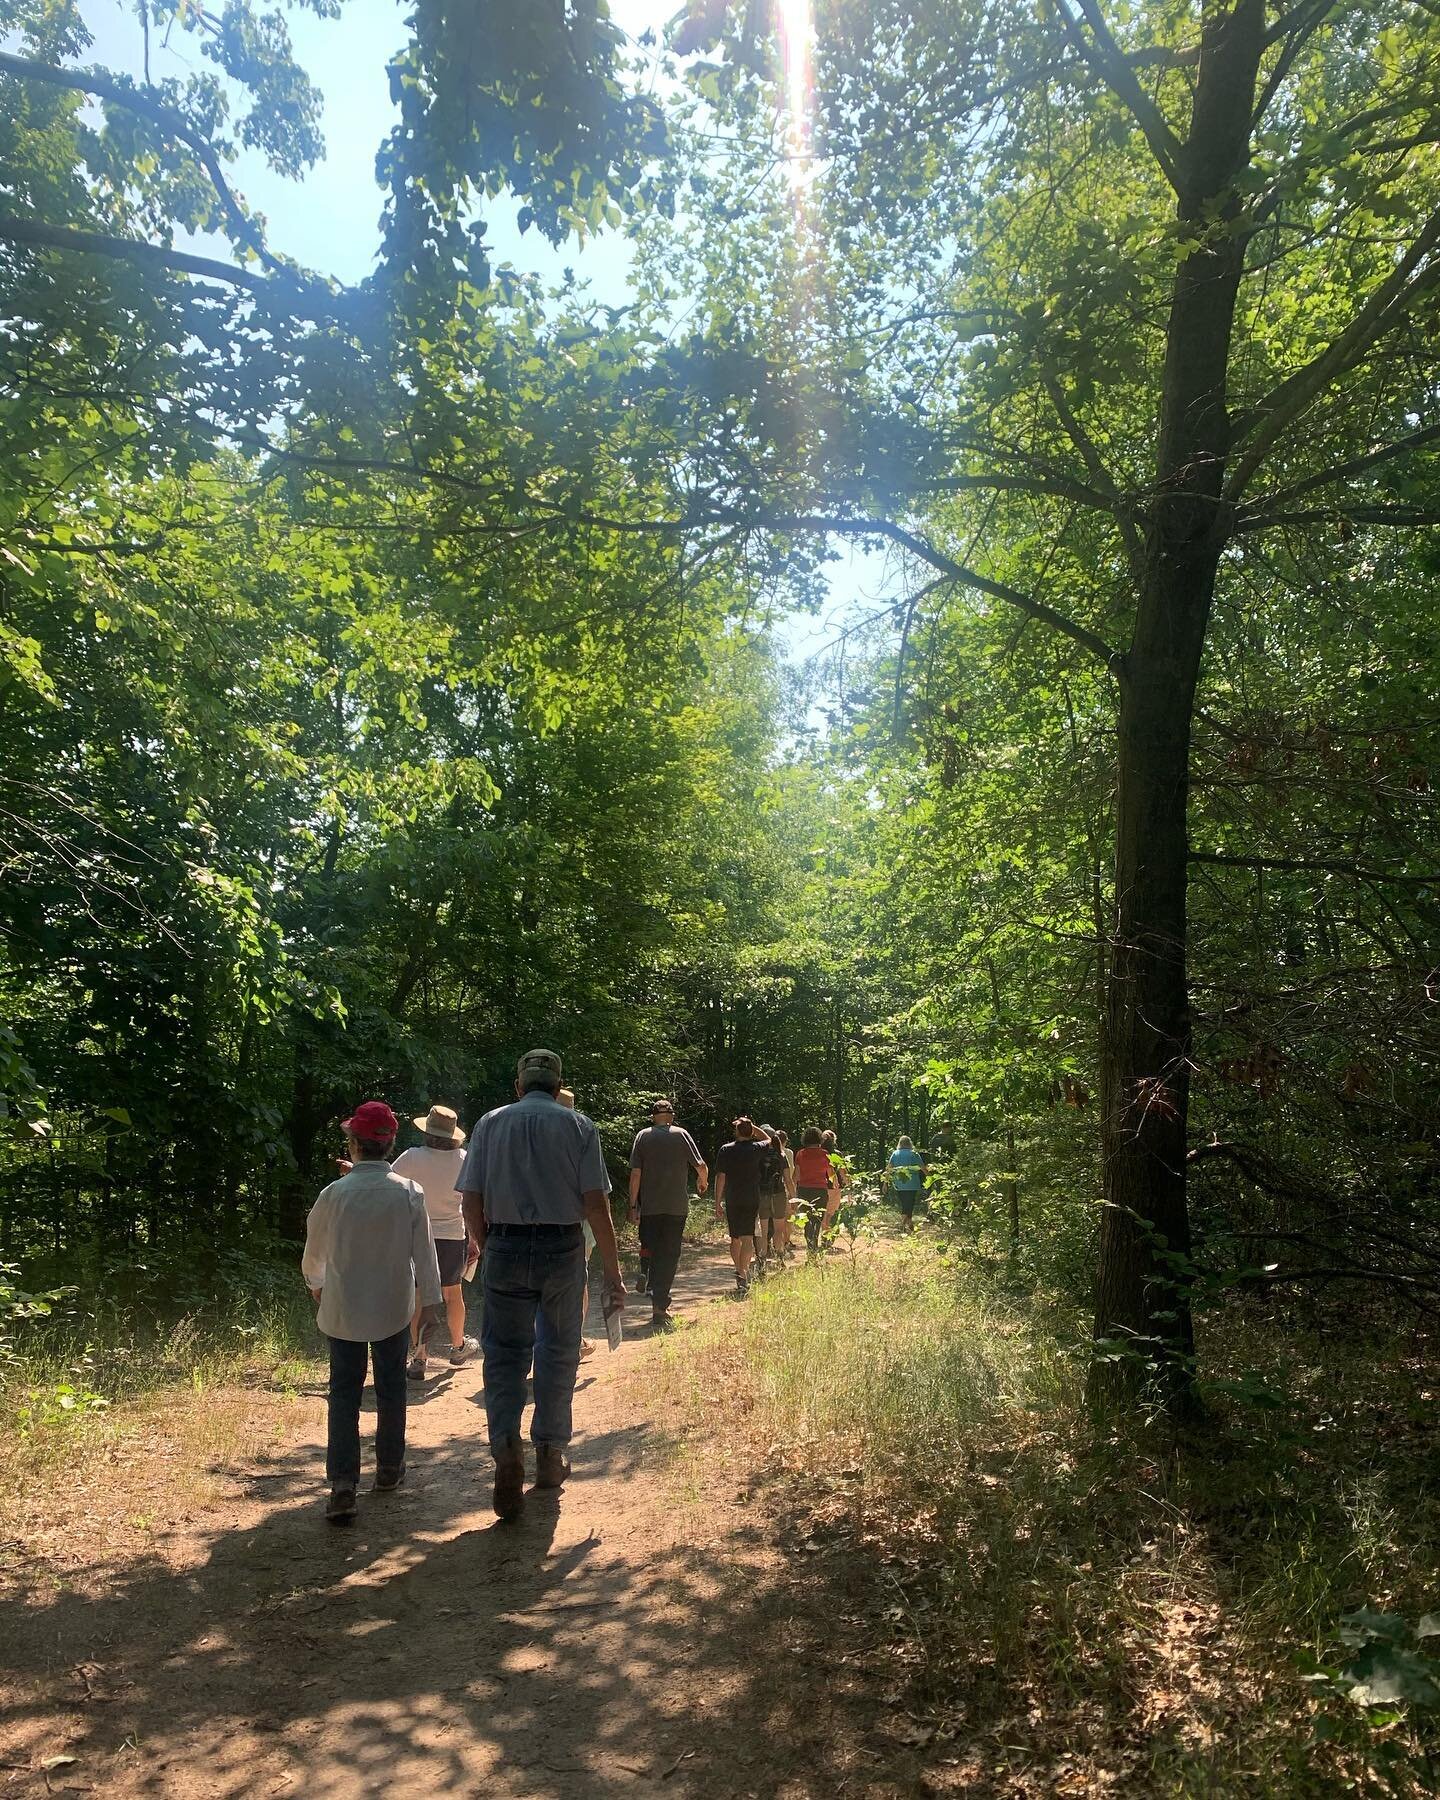 We had a wonderful turnout for our Saturday Series Guided Walk on the Natural Education Reserve with Conservation Team Coordinator, Steve Largent! Thank you for joining us on a beautiful Saturday morning to enjoy the natural world and learn about the